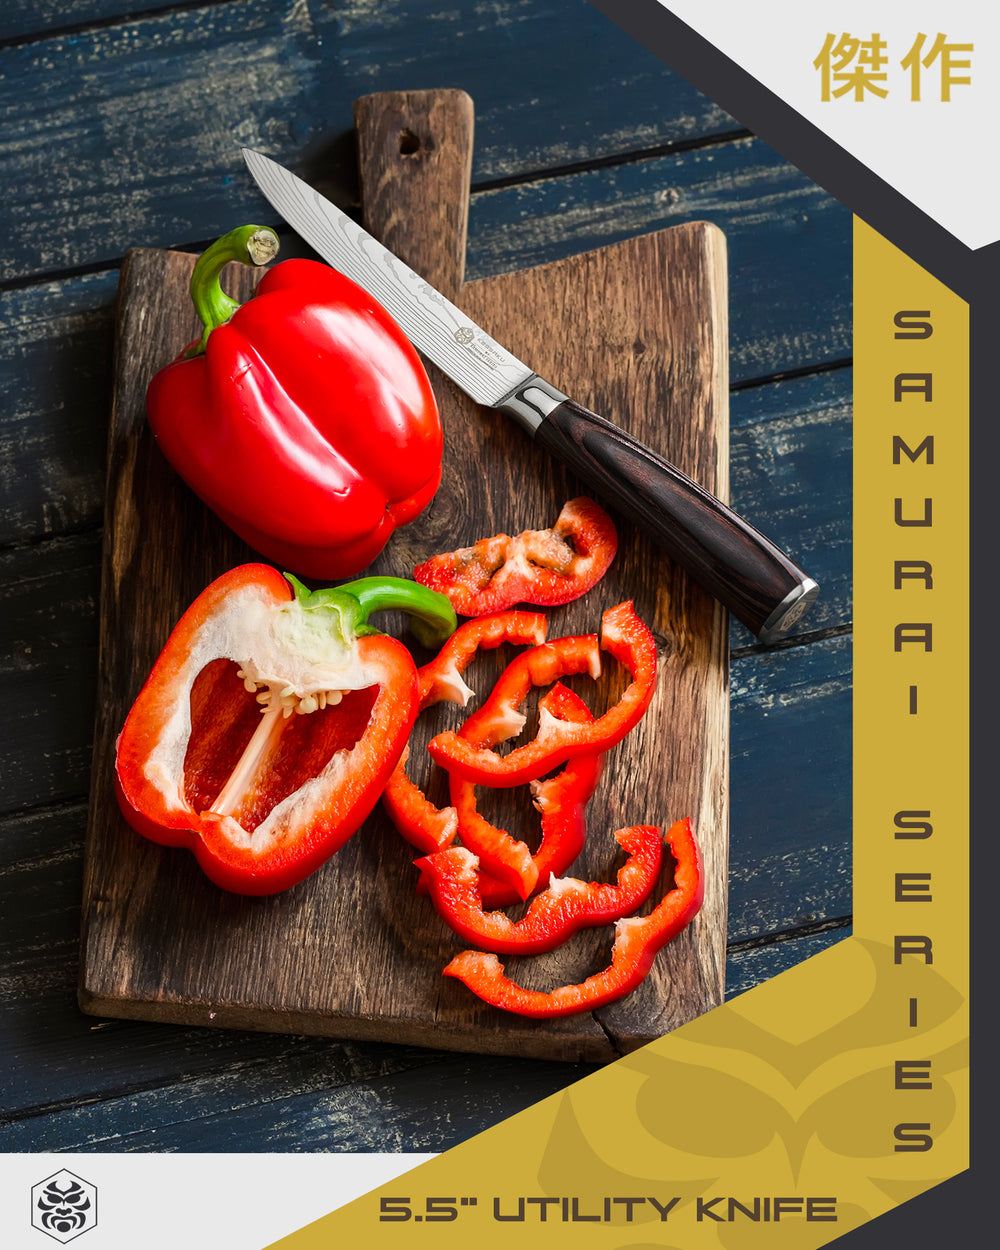 The Samurai Utility Knife and sliced red peppers on a cutting board